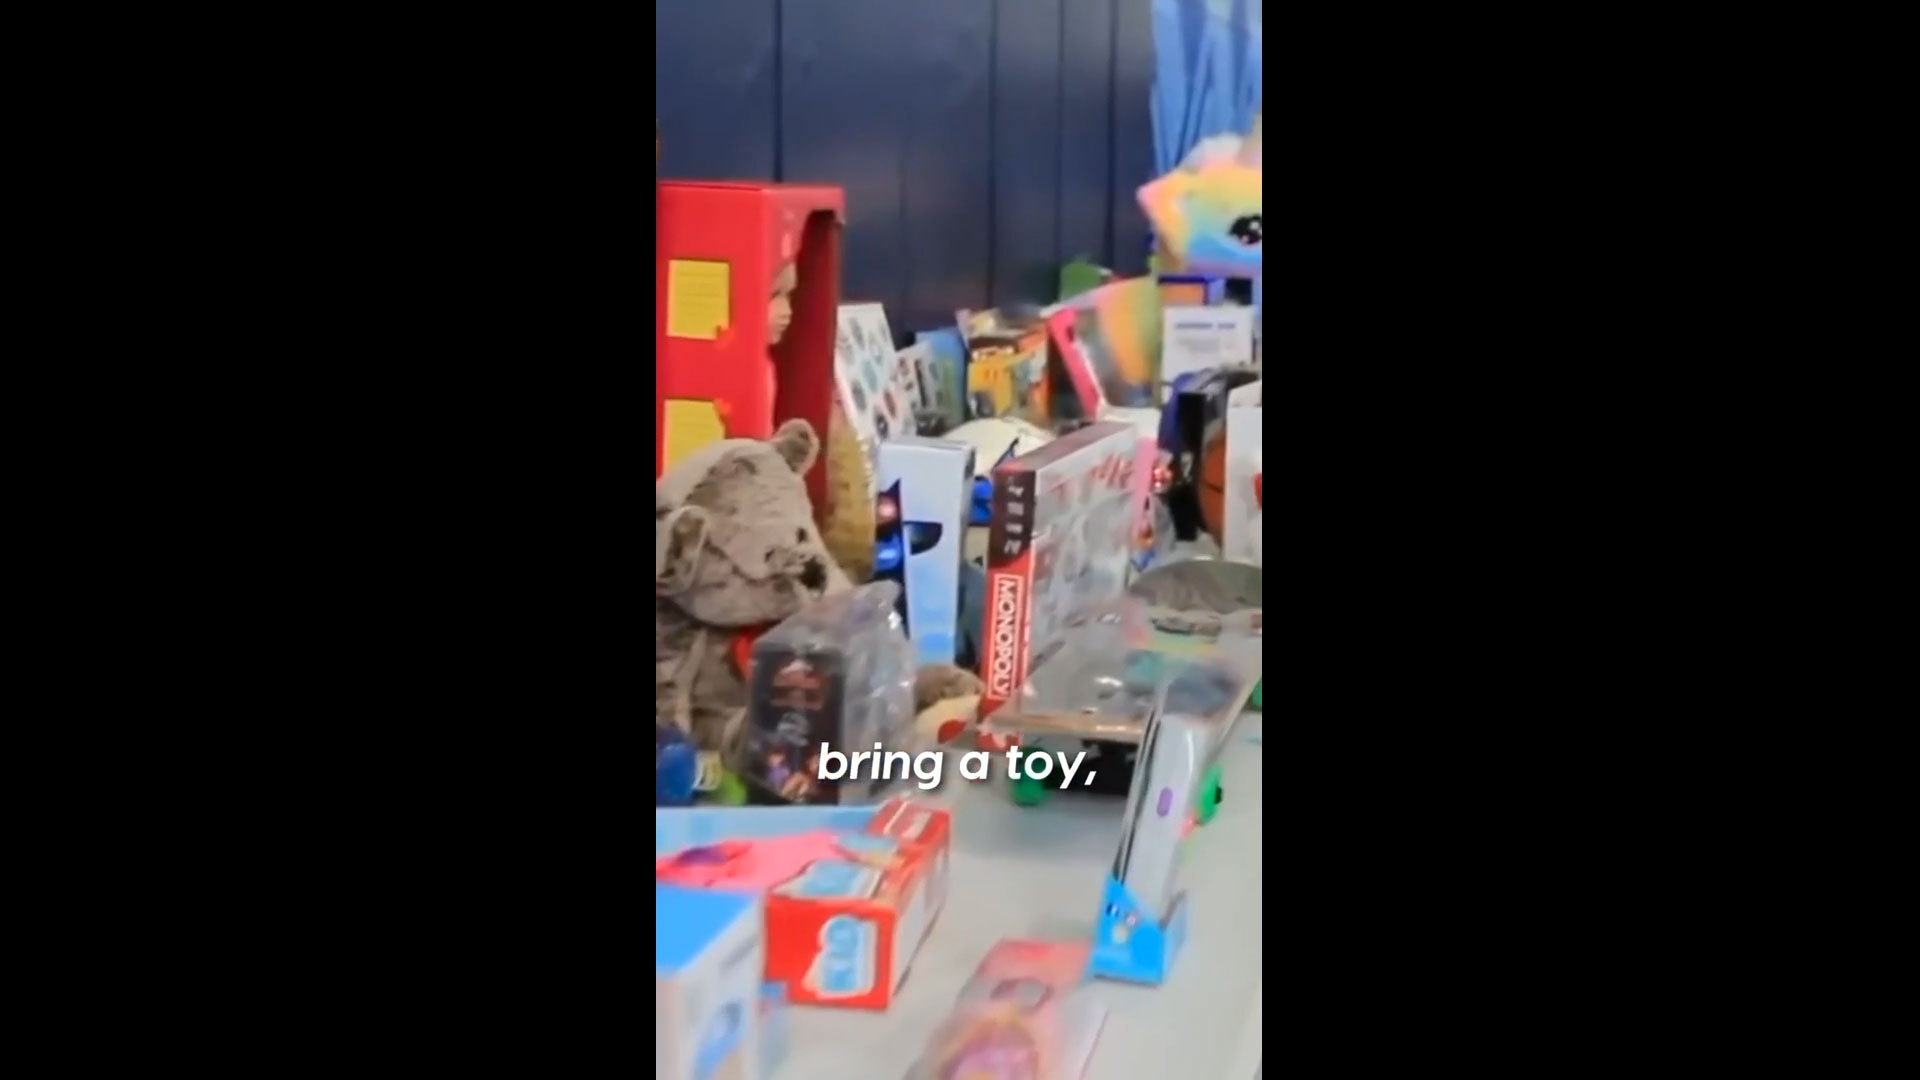 Video announcement for The Starboard Foundation Toy Drive